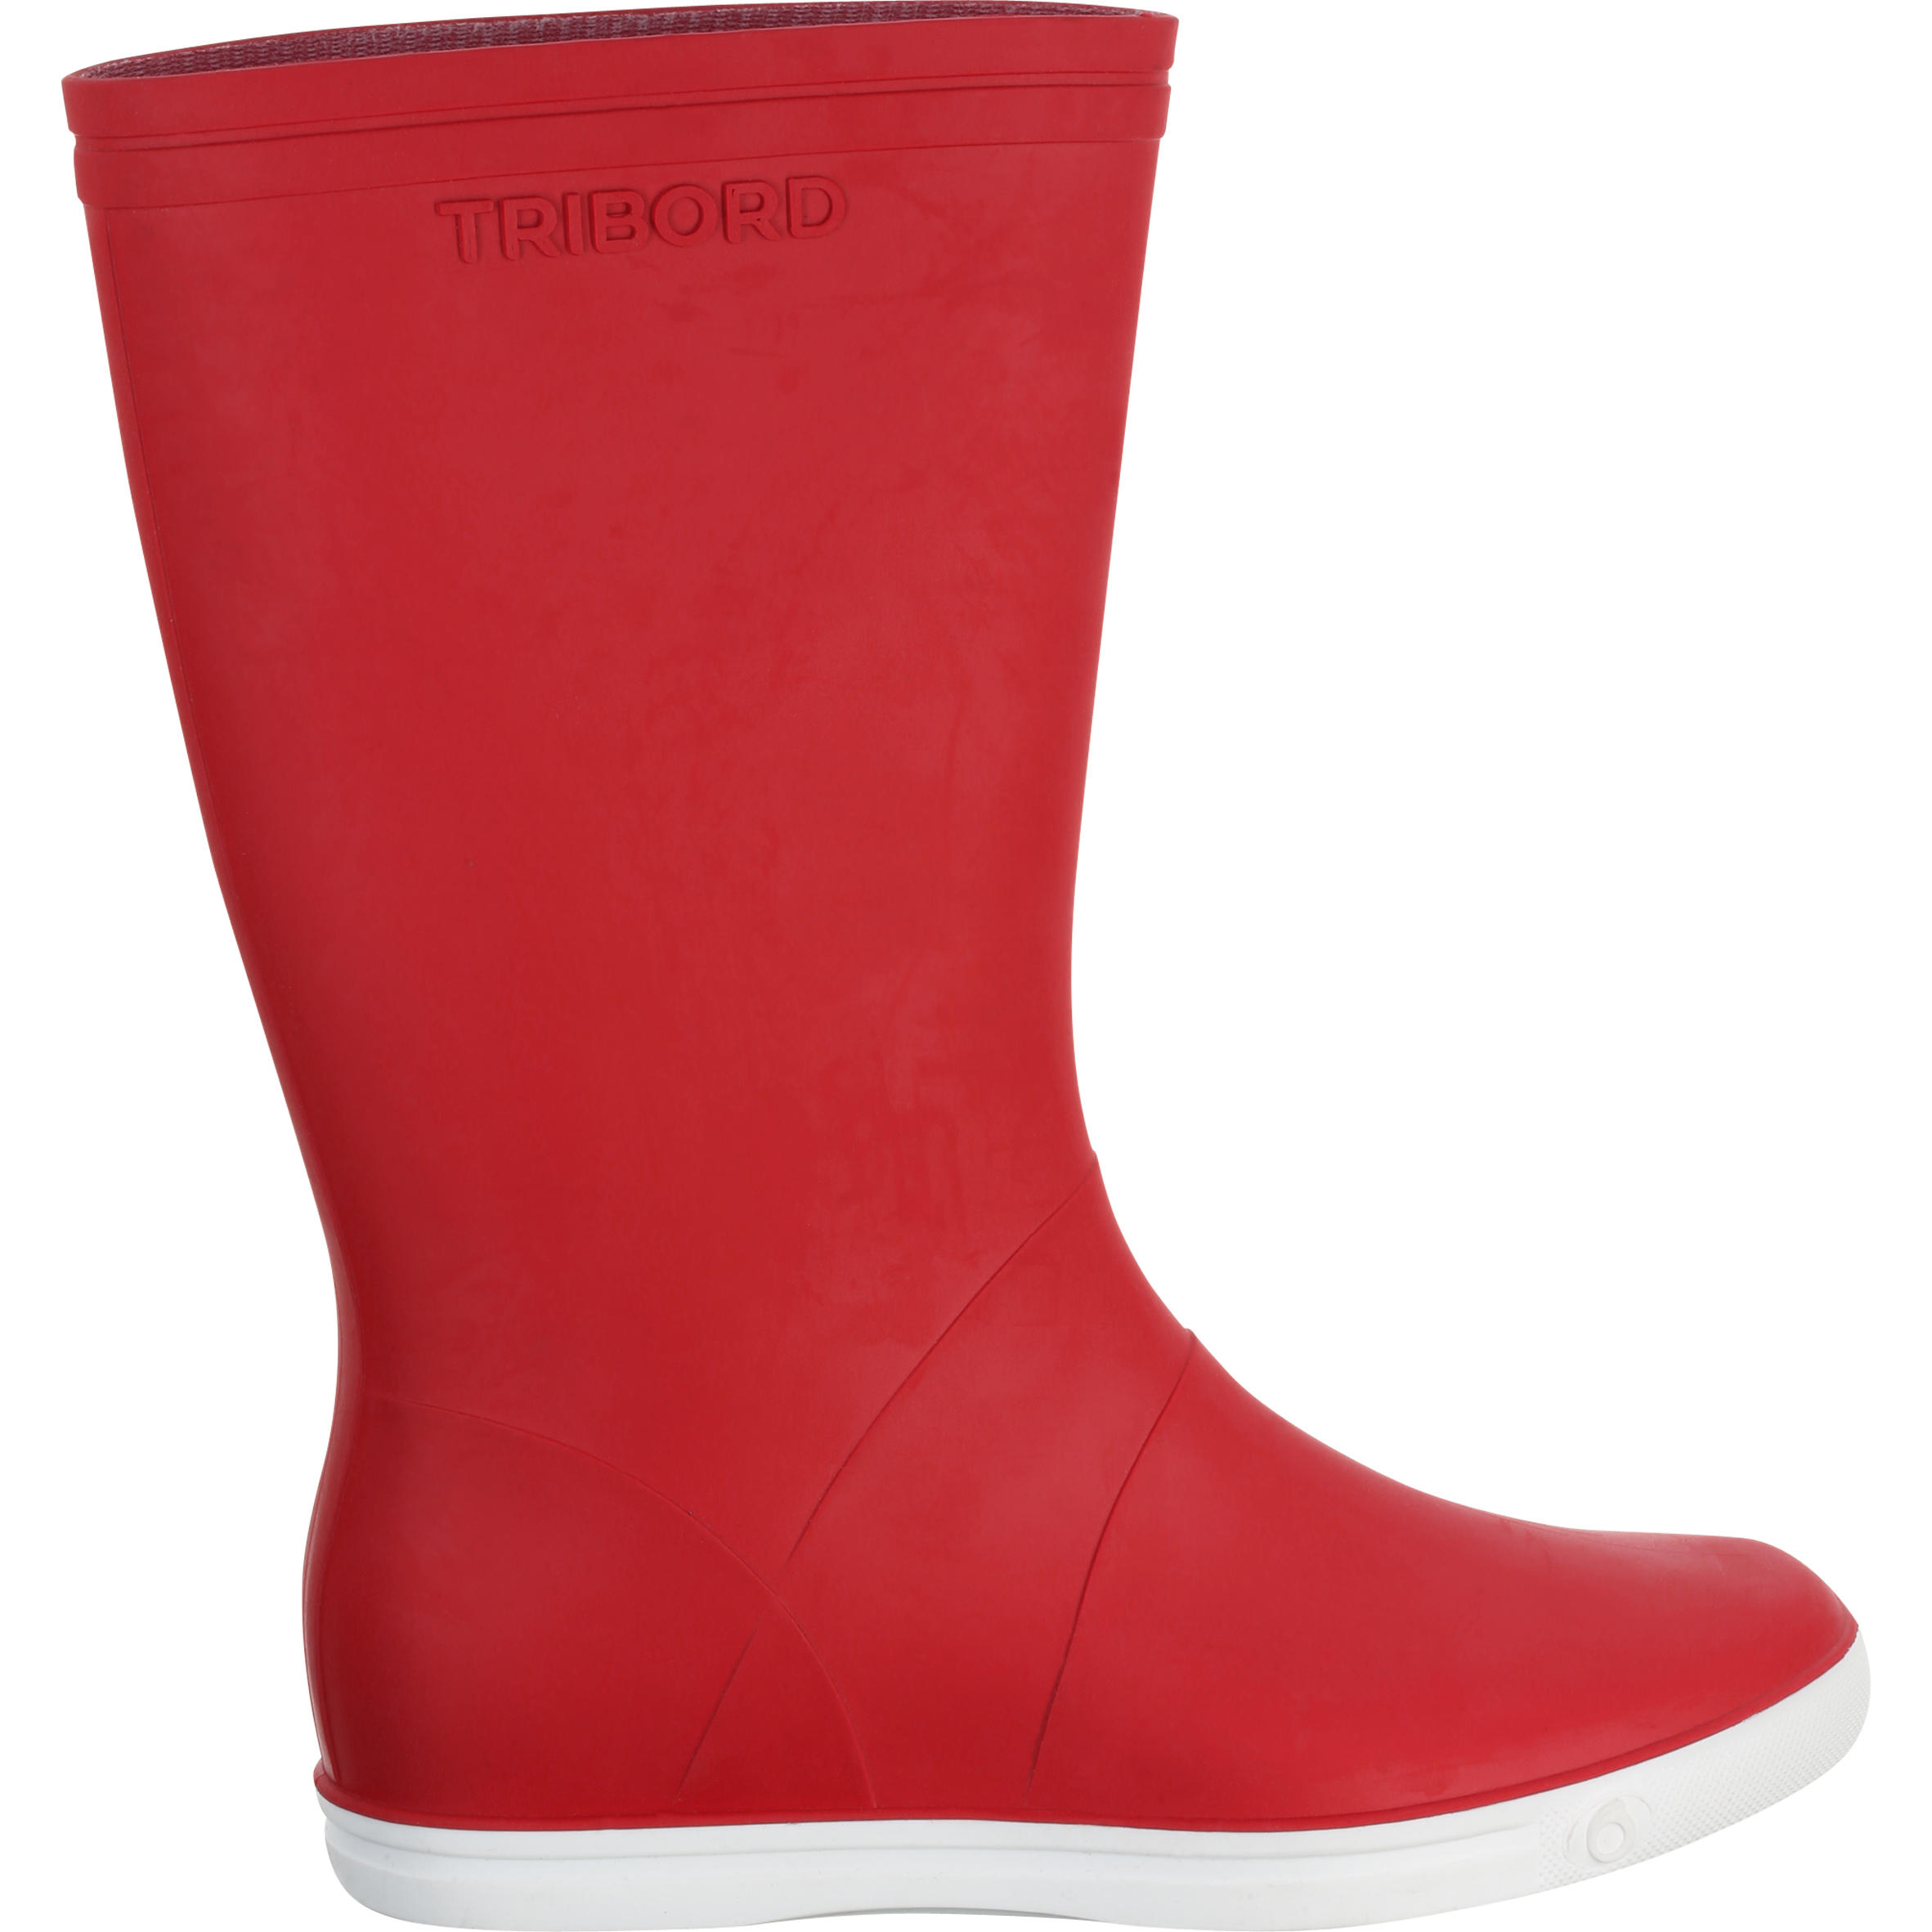 Sailing 100 Adult Wellies  - Red 2/12